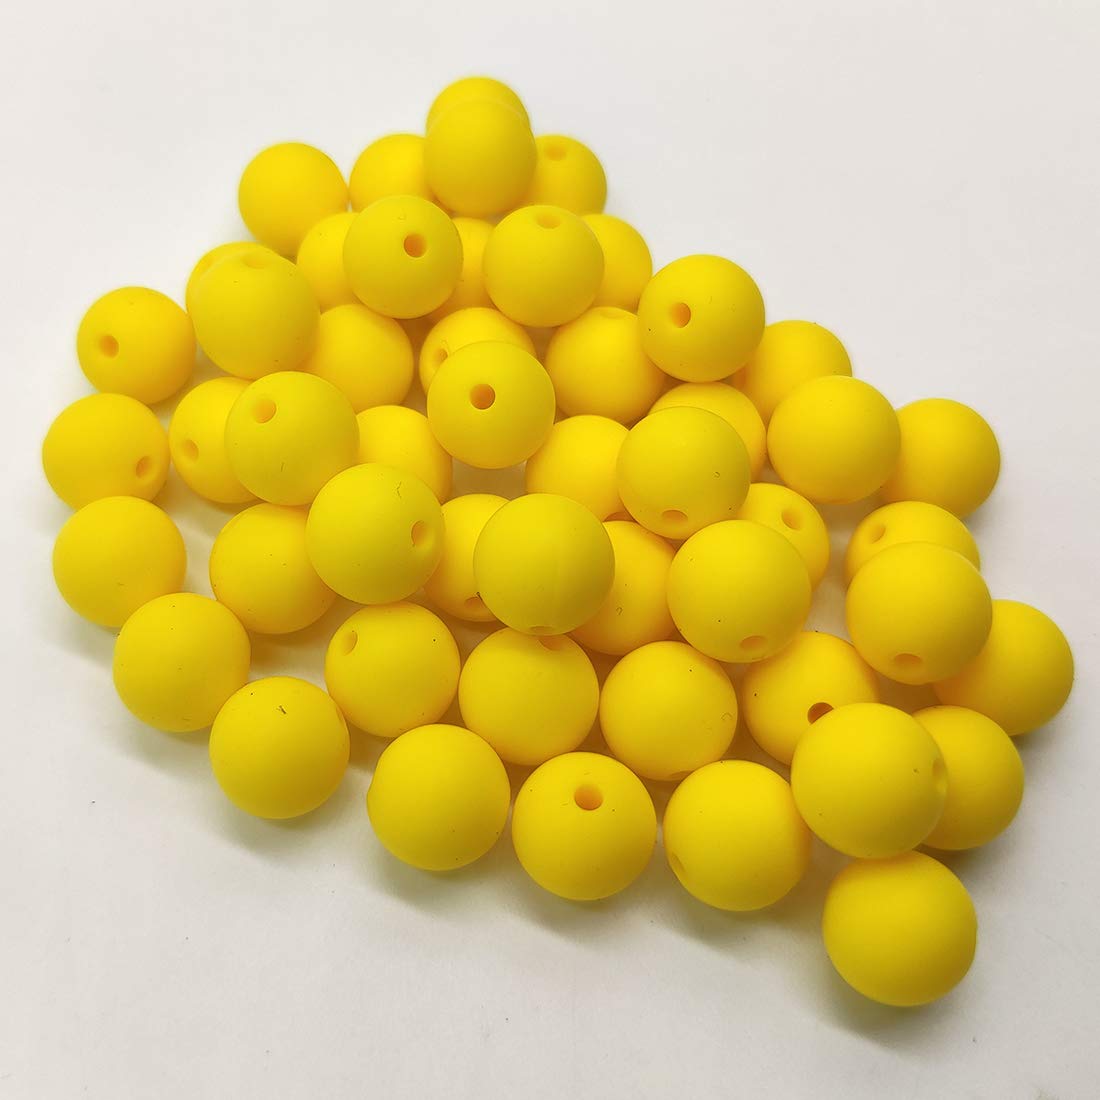 50pcs Bright Yellow Color Silicone Round Beads Sensory 15mm Silicone Pearl Bead Bulk Mom Necklace DIY Jewelry Making Decoration